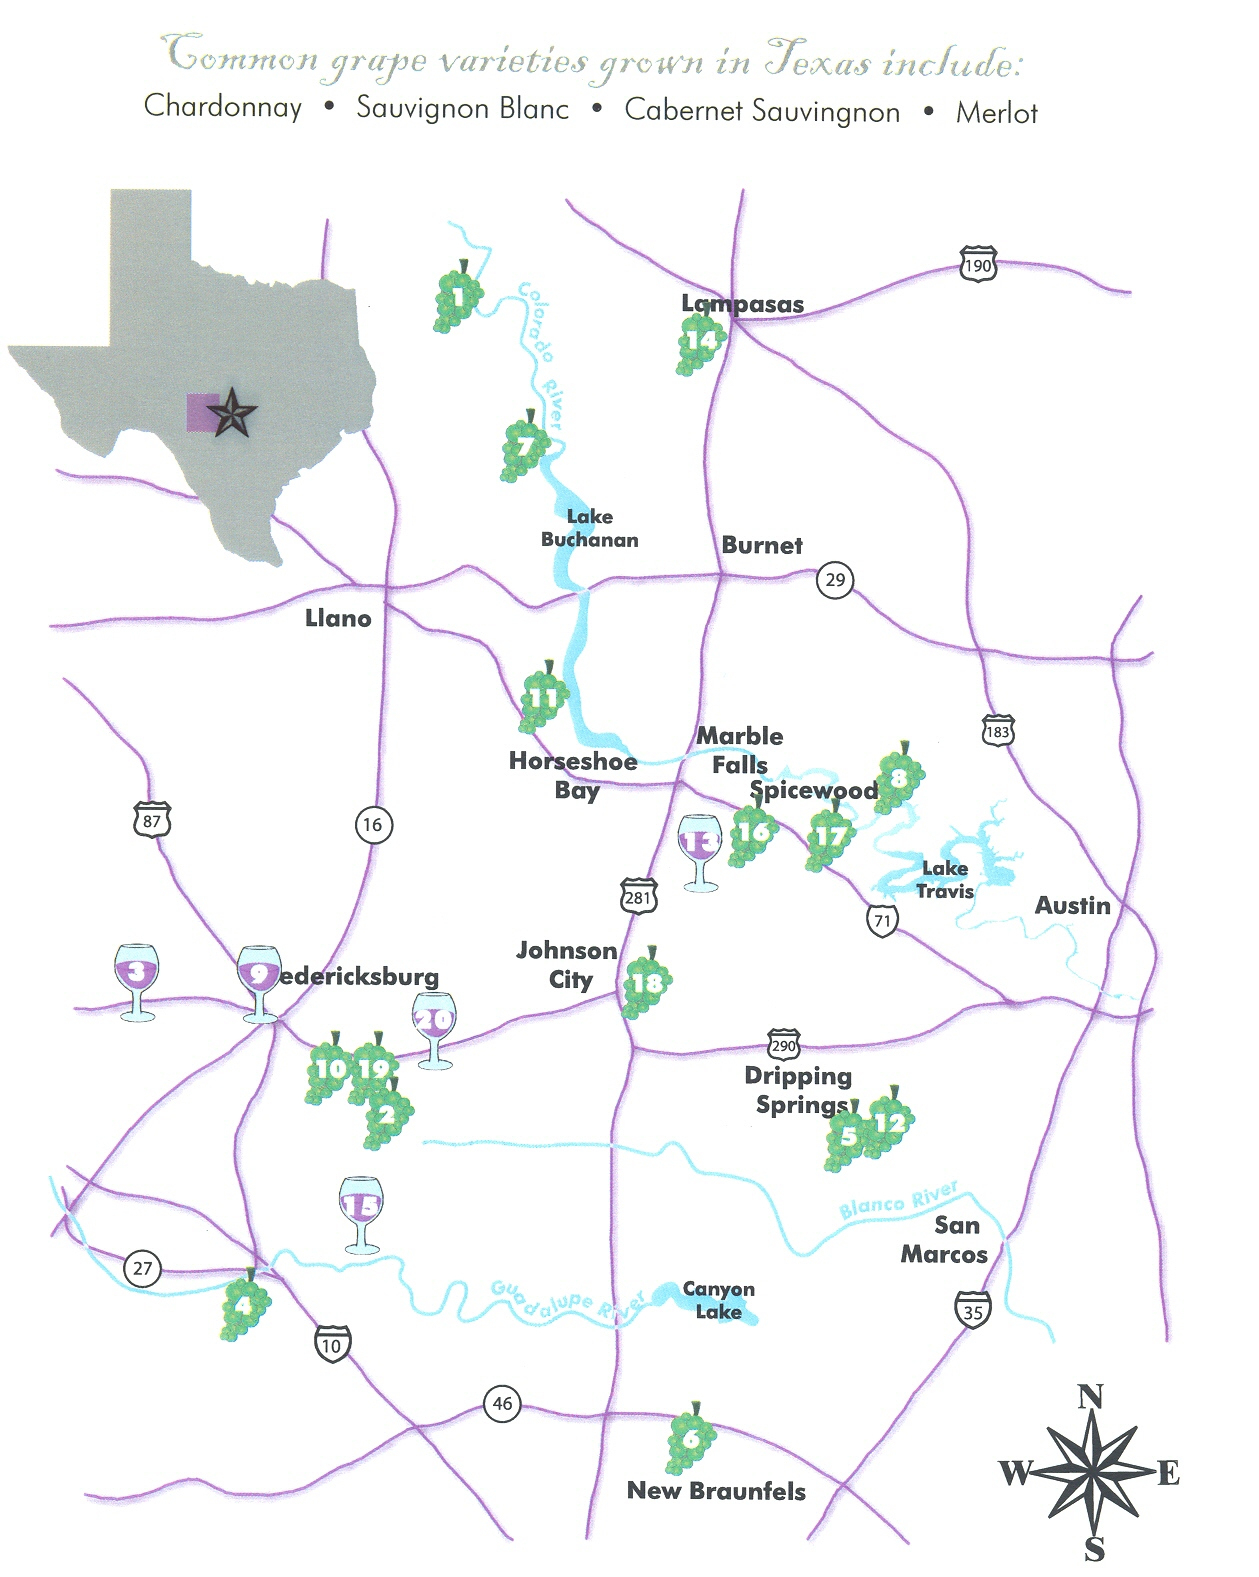 Texas Hill Country Vineyards &amp;amp; Wineries - North Texas Wine Trail Map